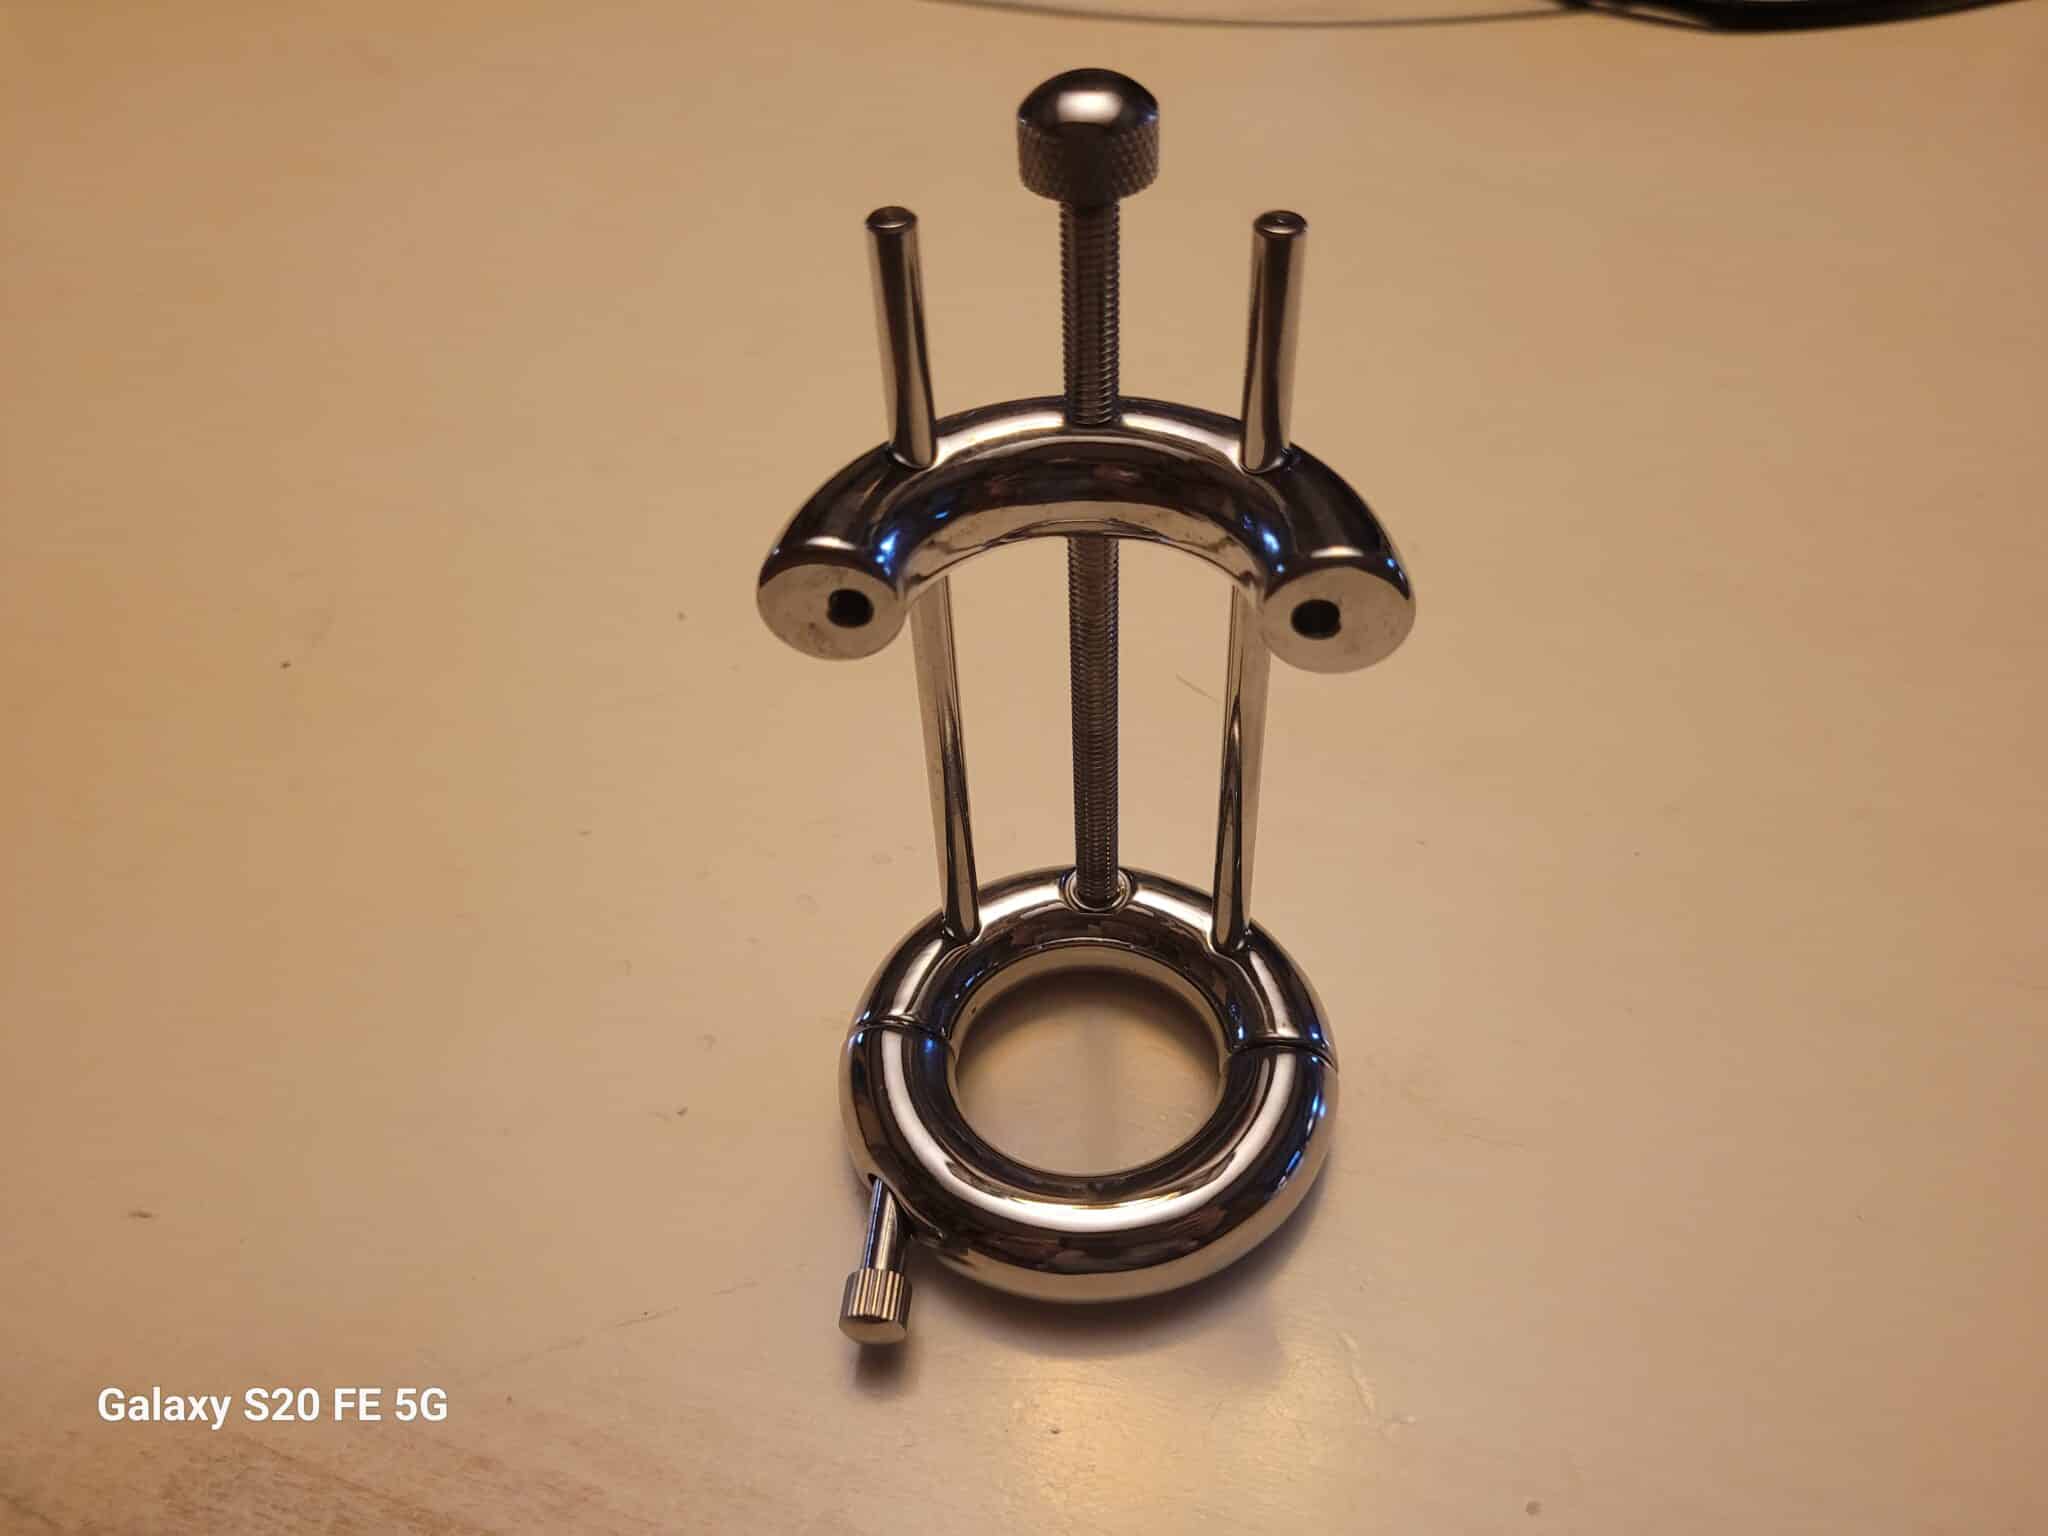 Oxy Extreme Double Ring CBT Ball Stretcher Did the performance live up to the claims?